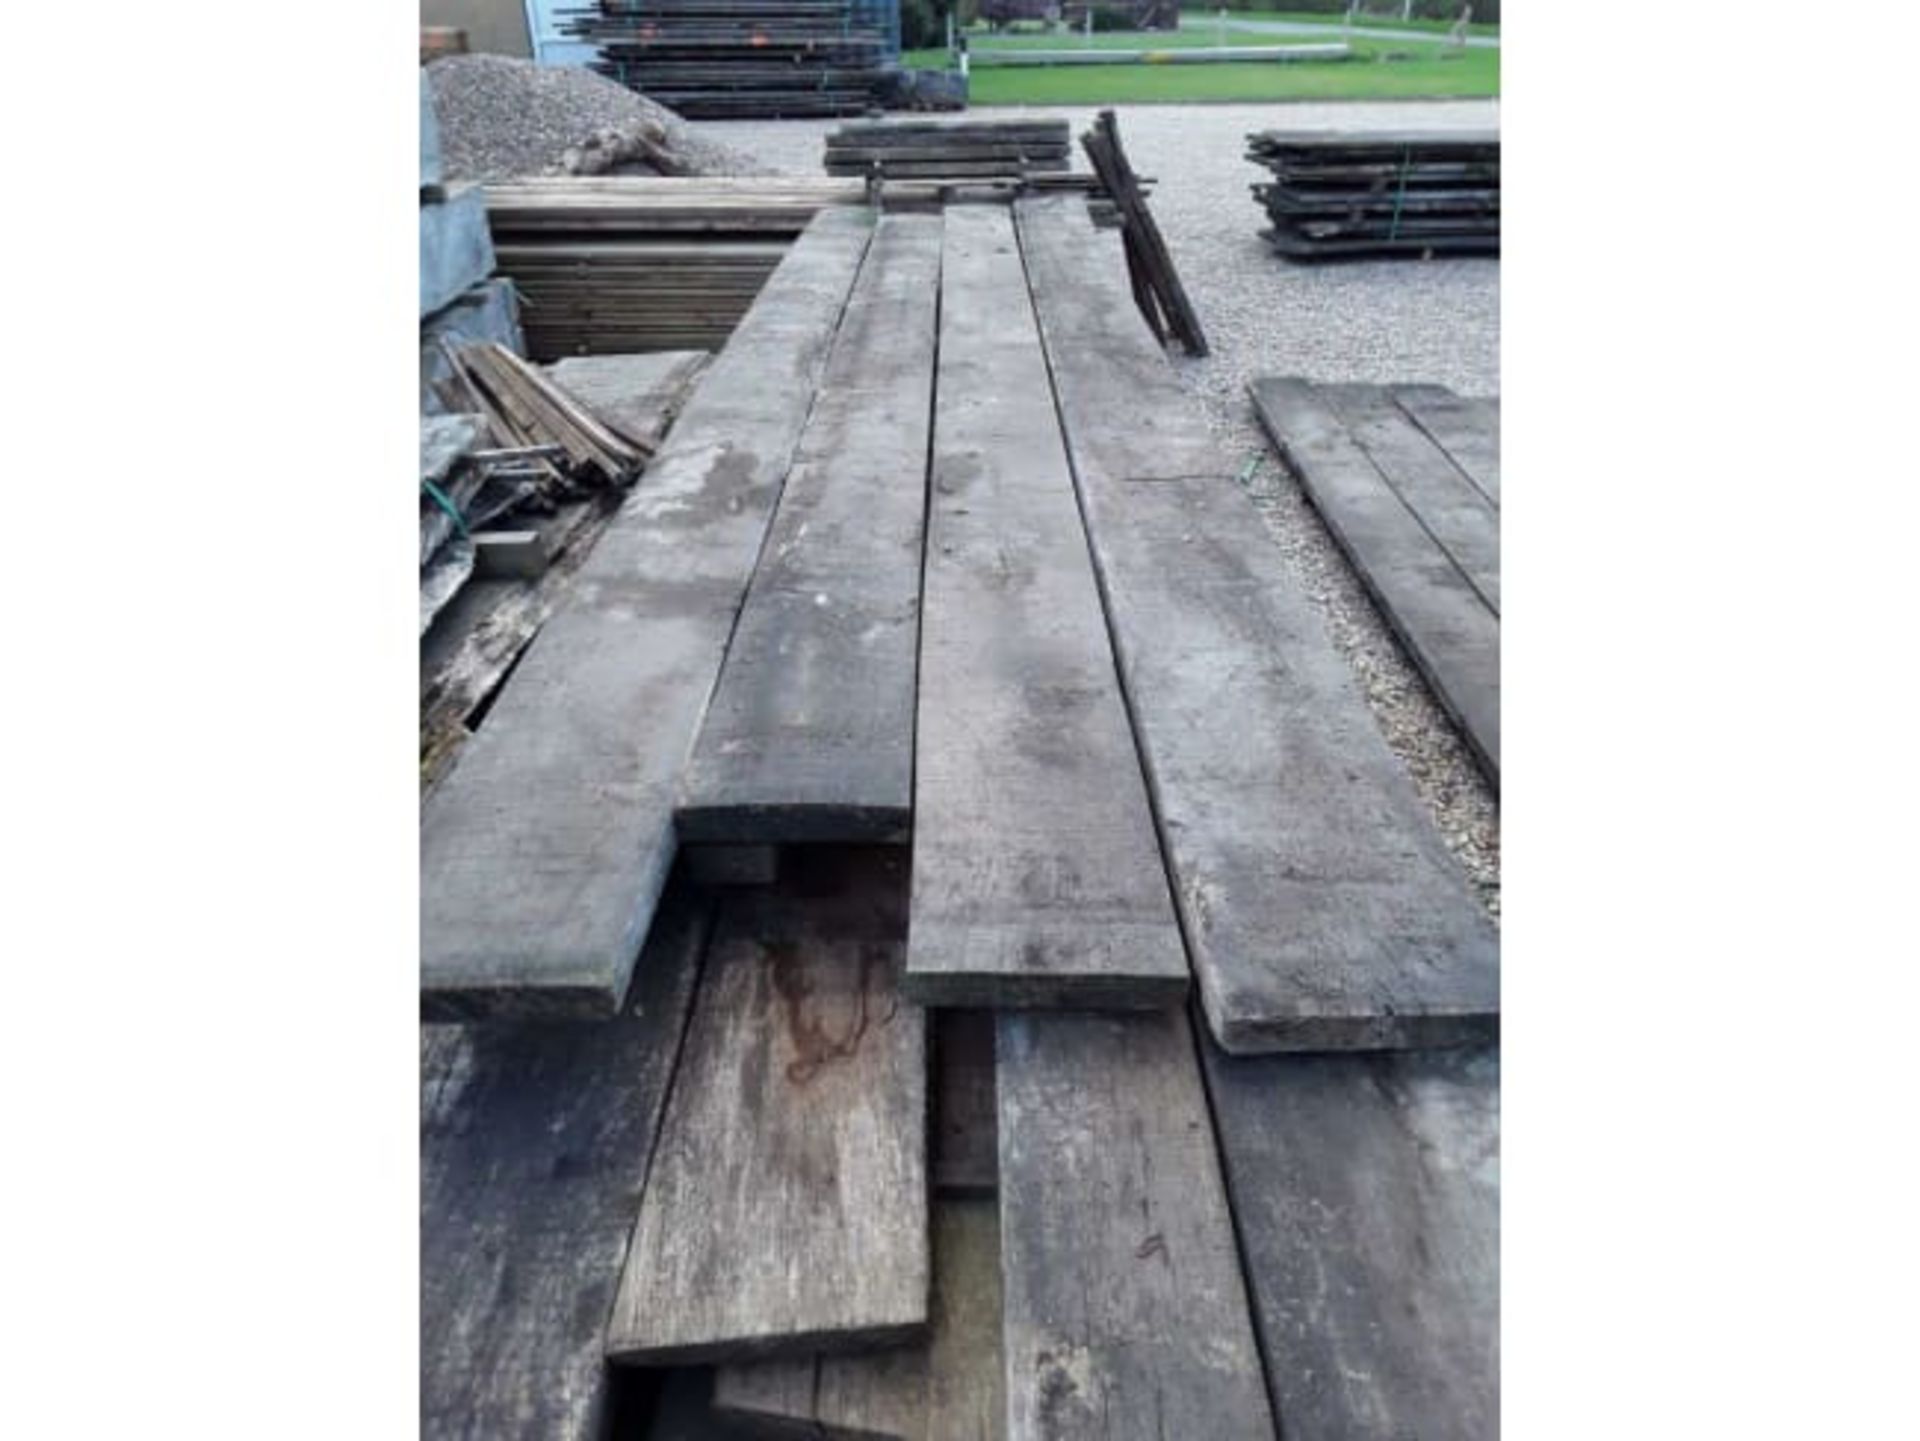 12 x Hardwood Air Dried Square Edged Timber English Oak Boards / Slabs / Planks - Image 7 of 8